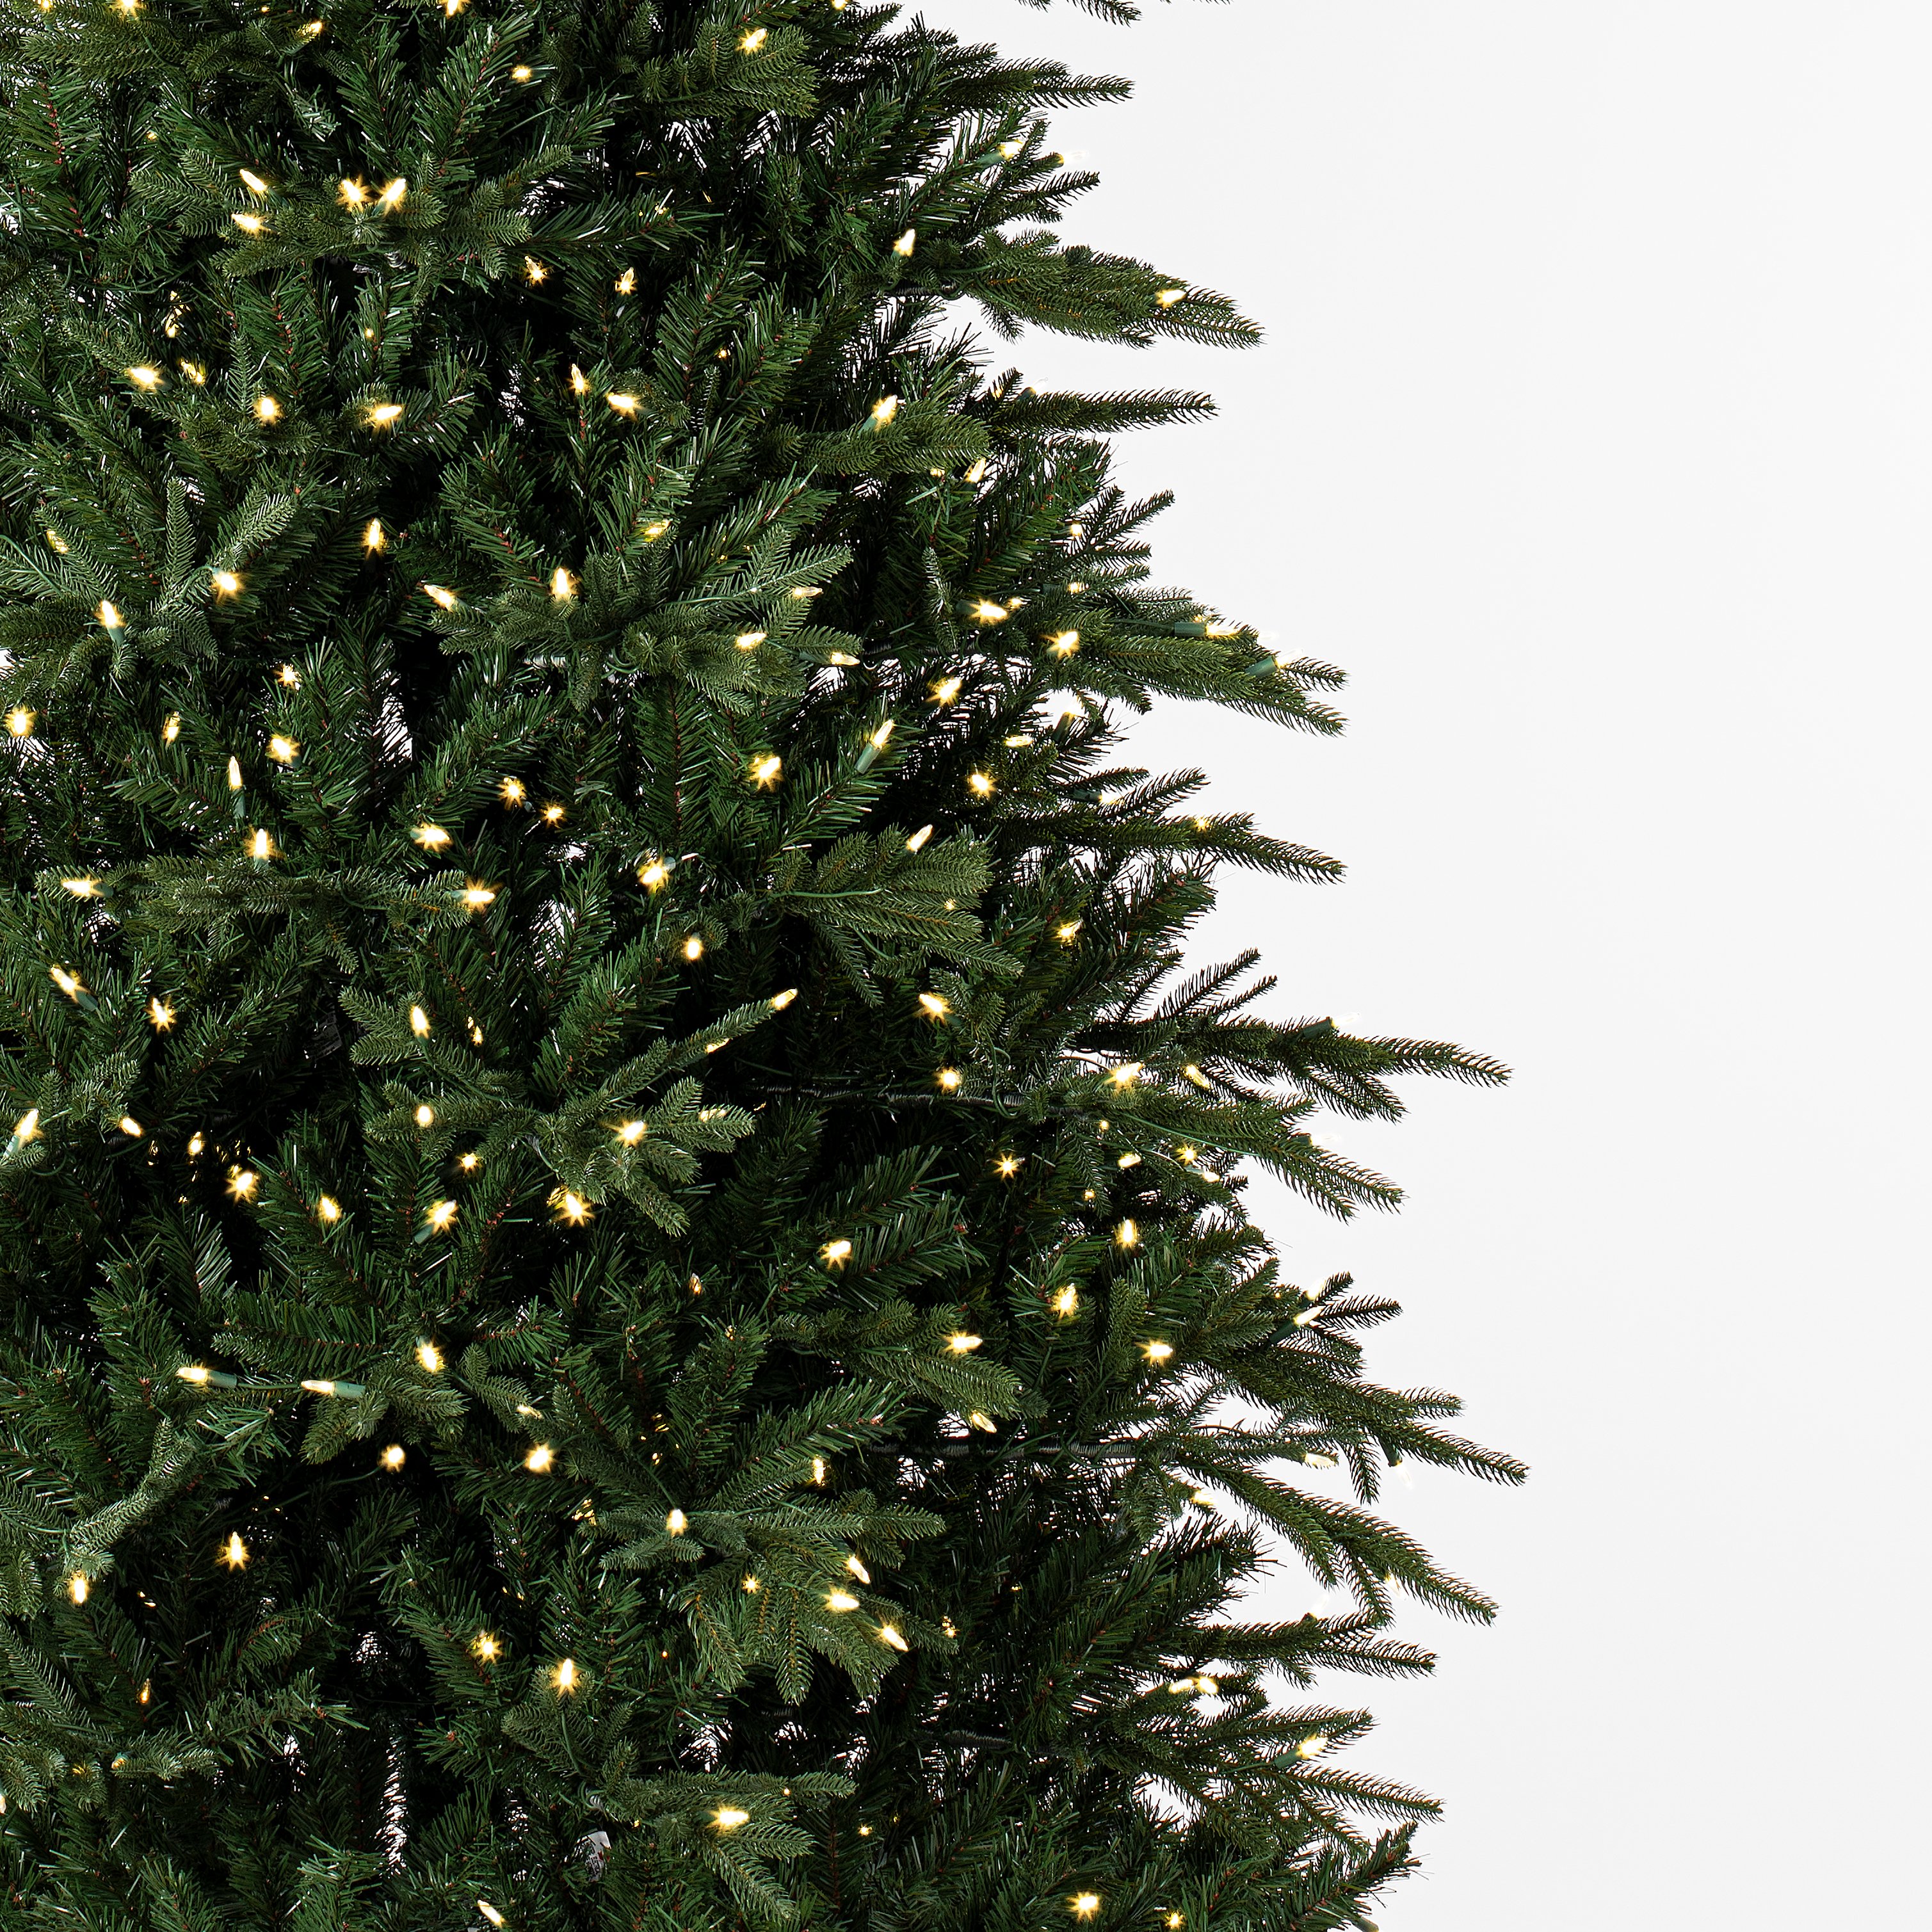 The Art of the Artificial Christmas Tree: A Professional Designer's Guide